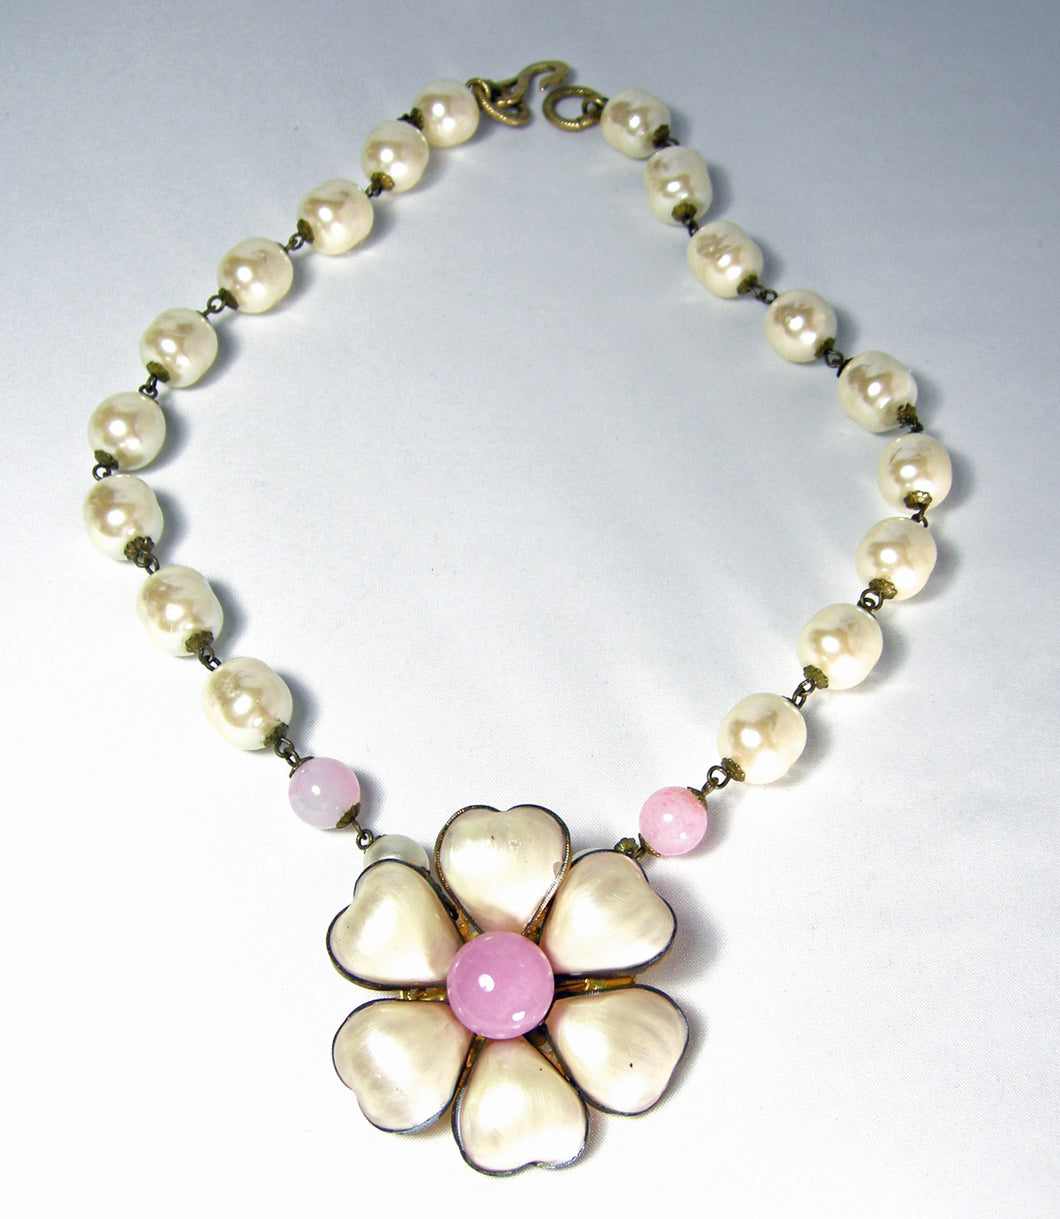 Sold at Auction: Vintage Chanel Pearl Necklace w Gripoix Glass